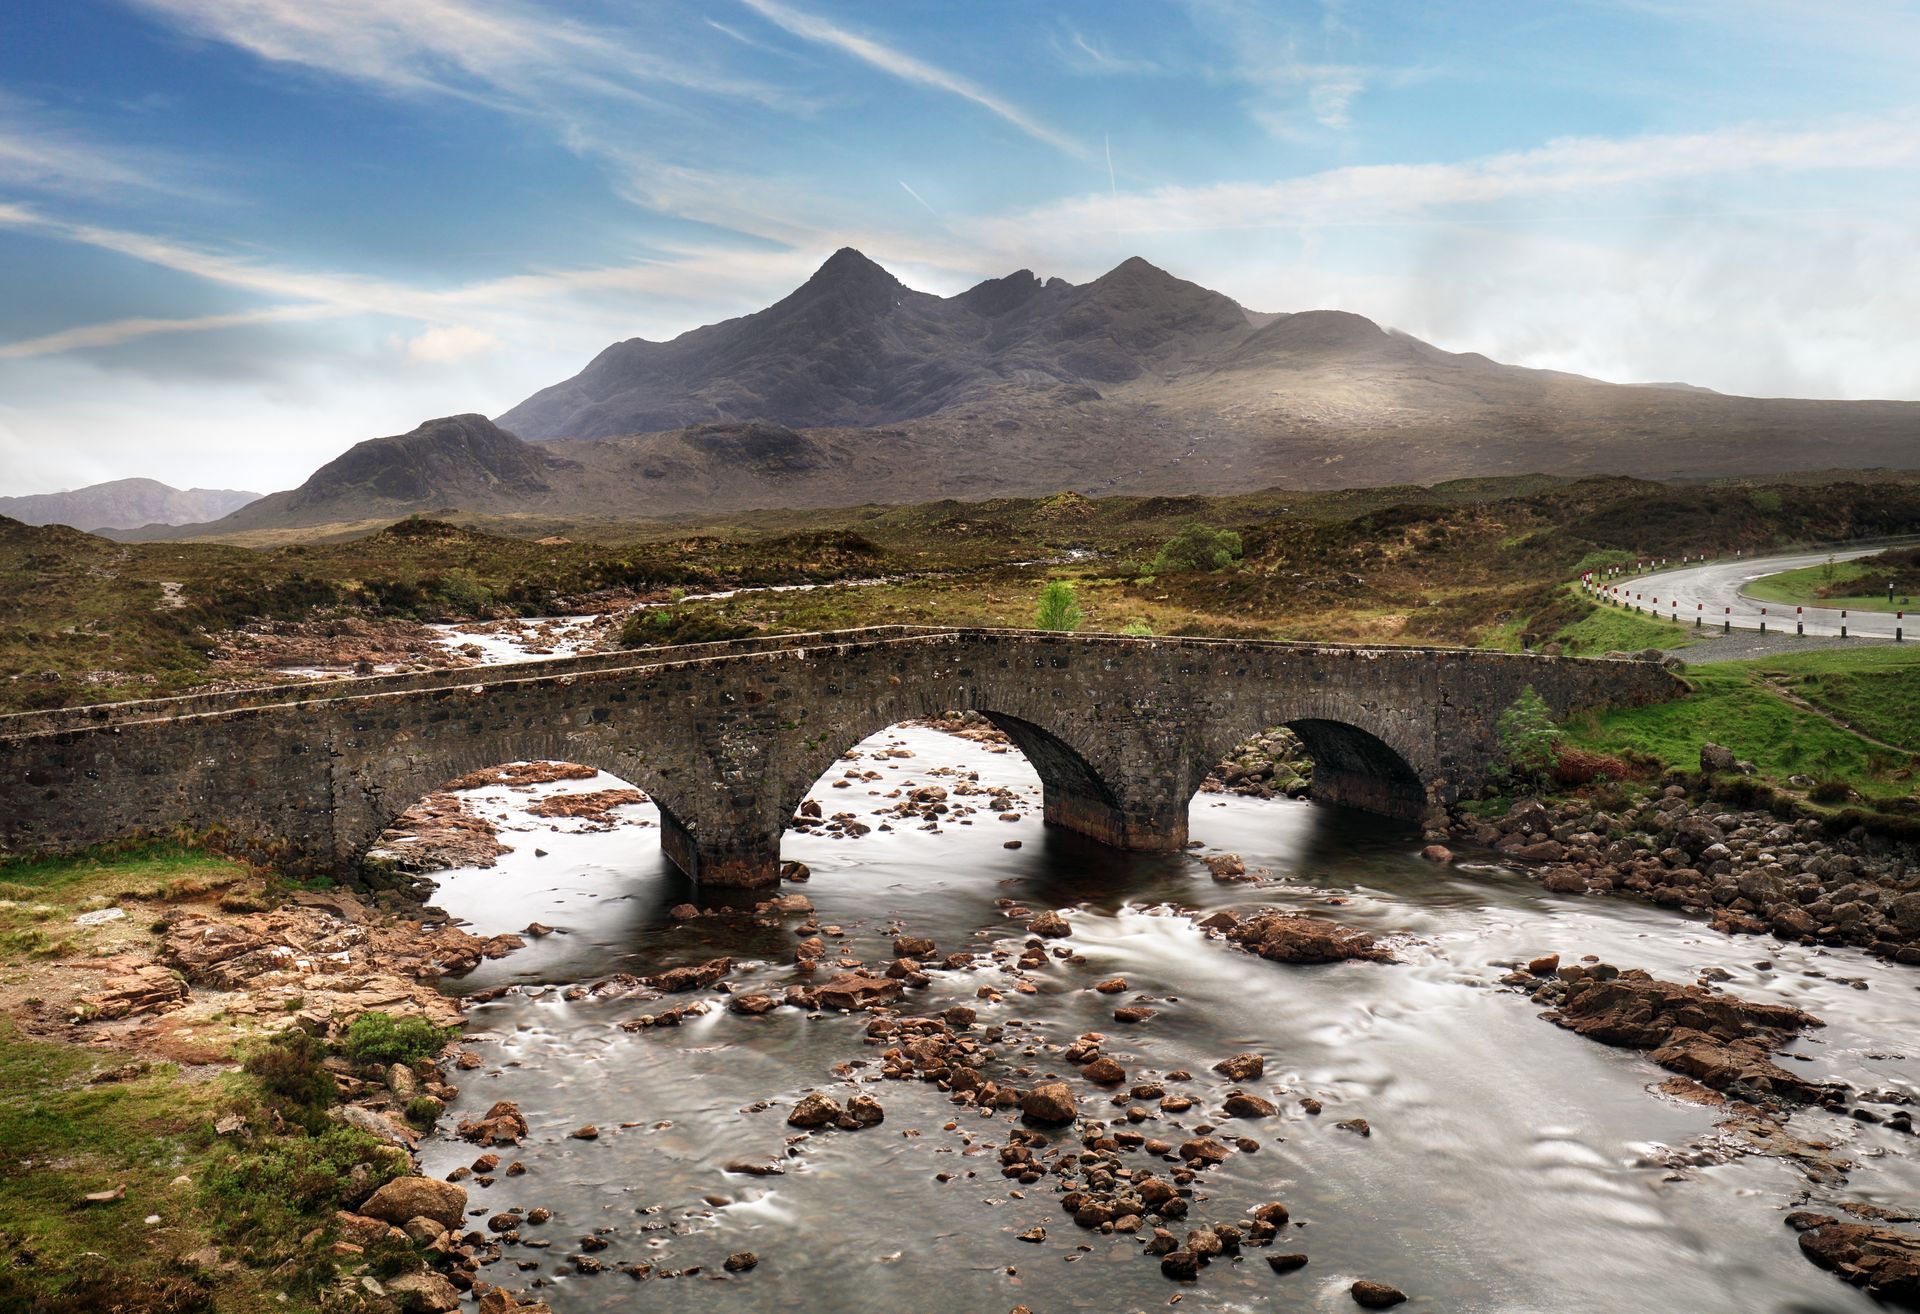 Image of the old bridge at Sligachen with the Culin mountains